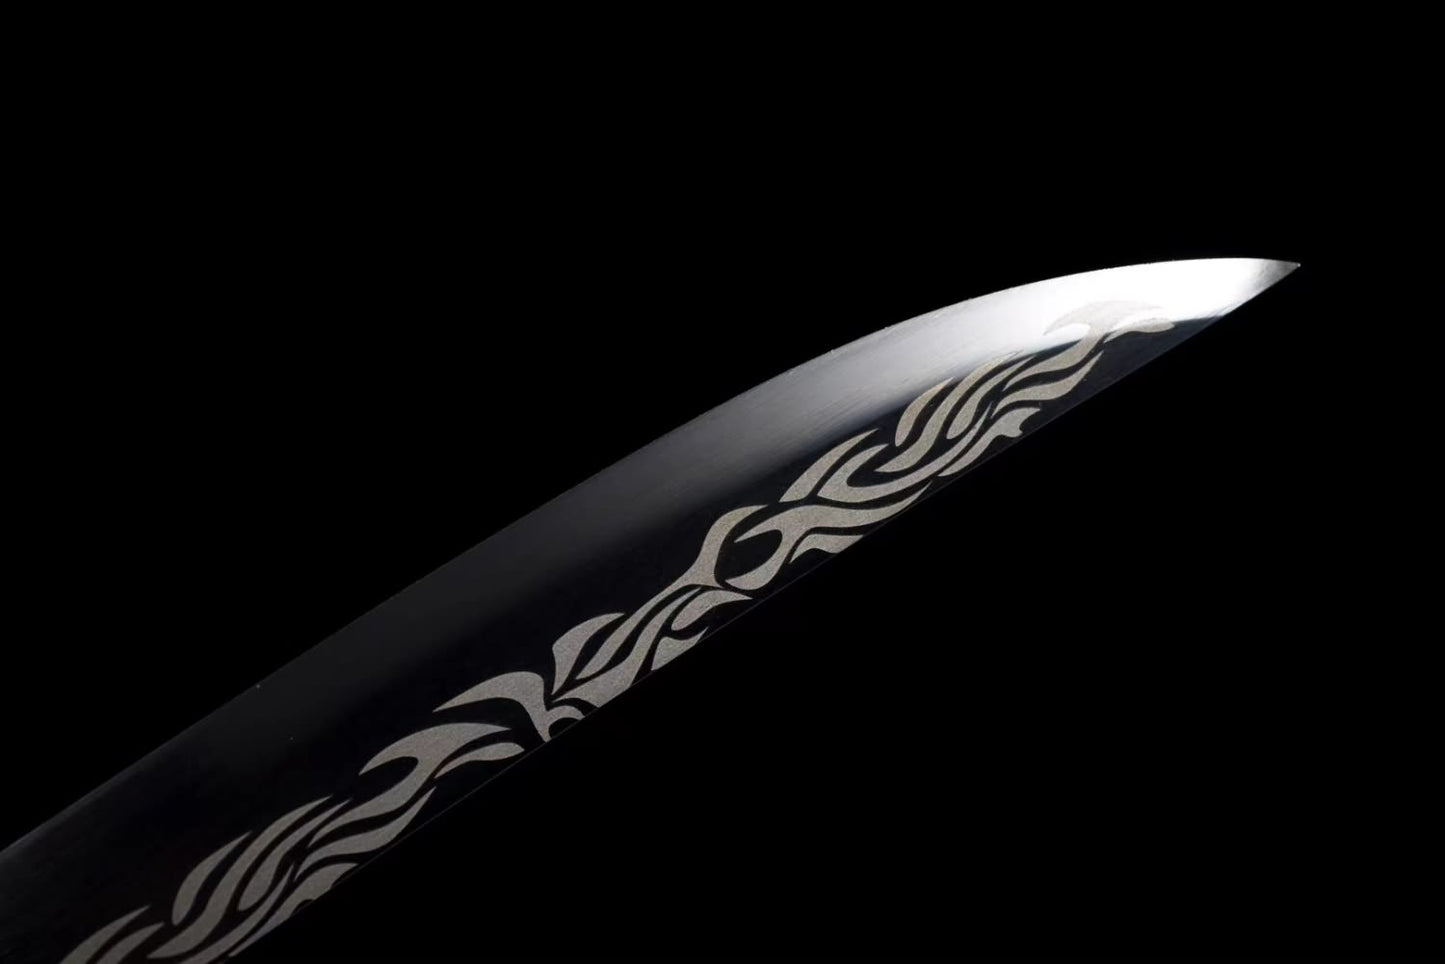 Eagle Sword Real Forged High Carbon Steel Blade,Alloy Fittings,Rosewood Scabbard